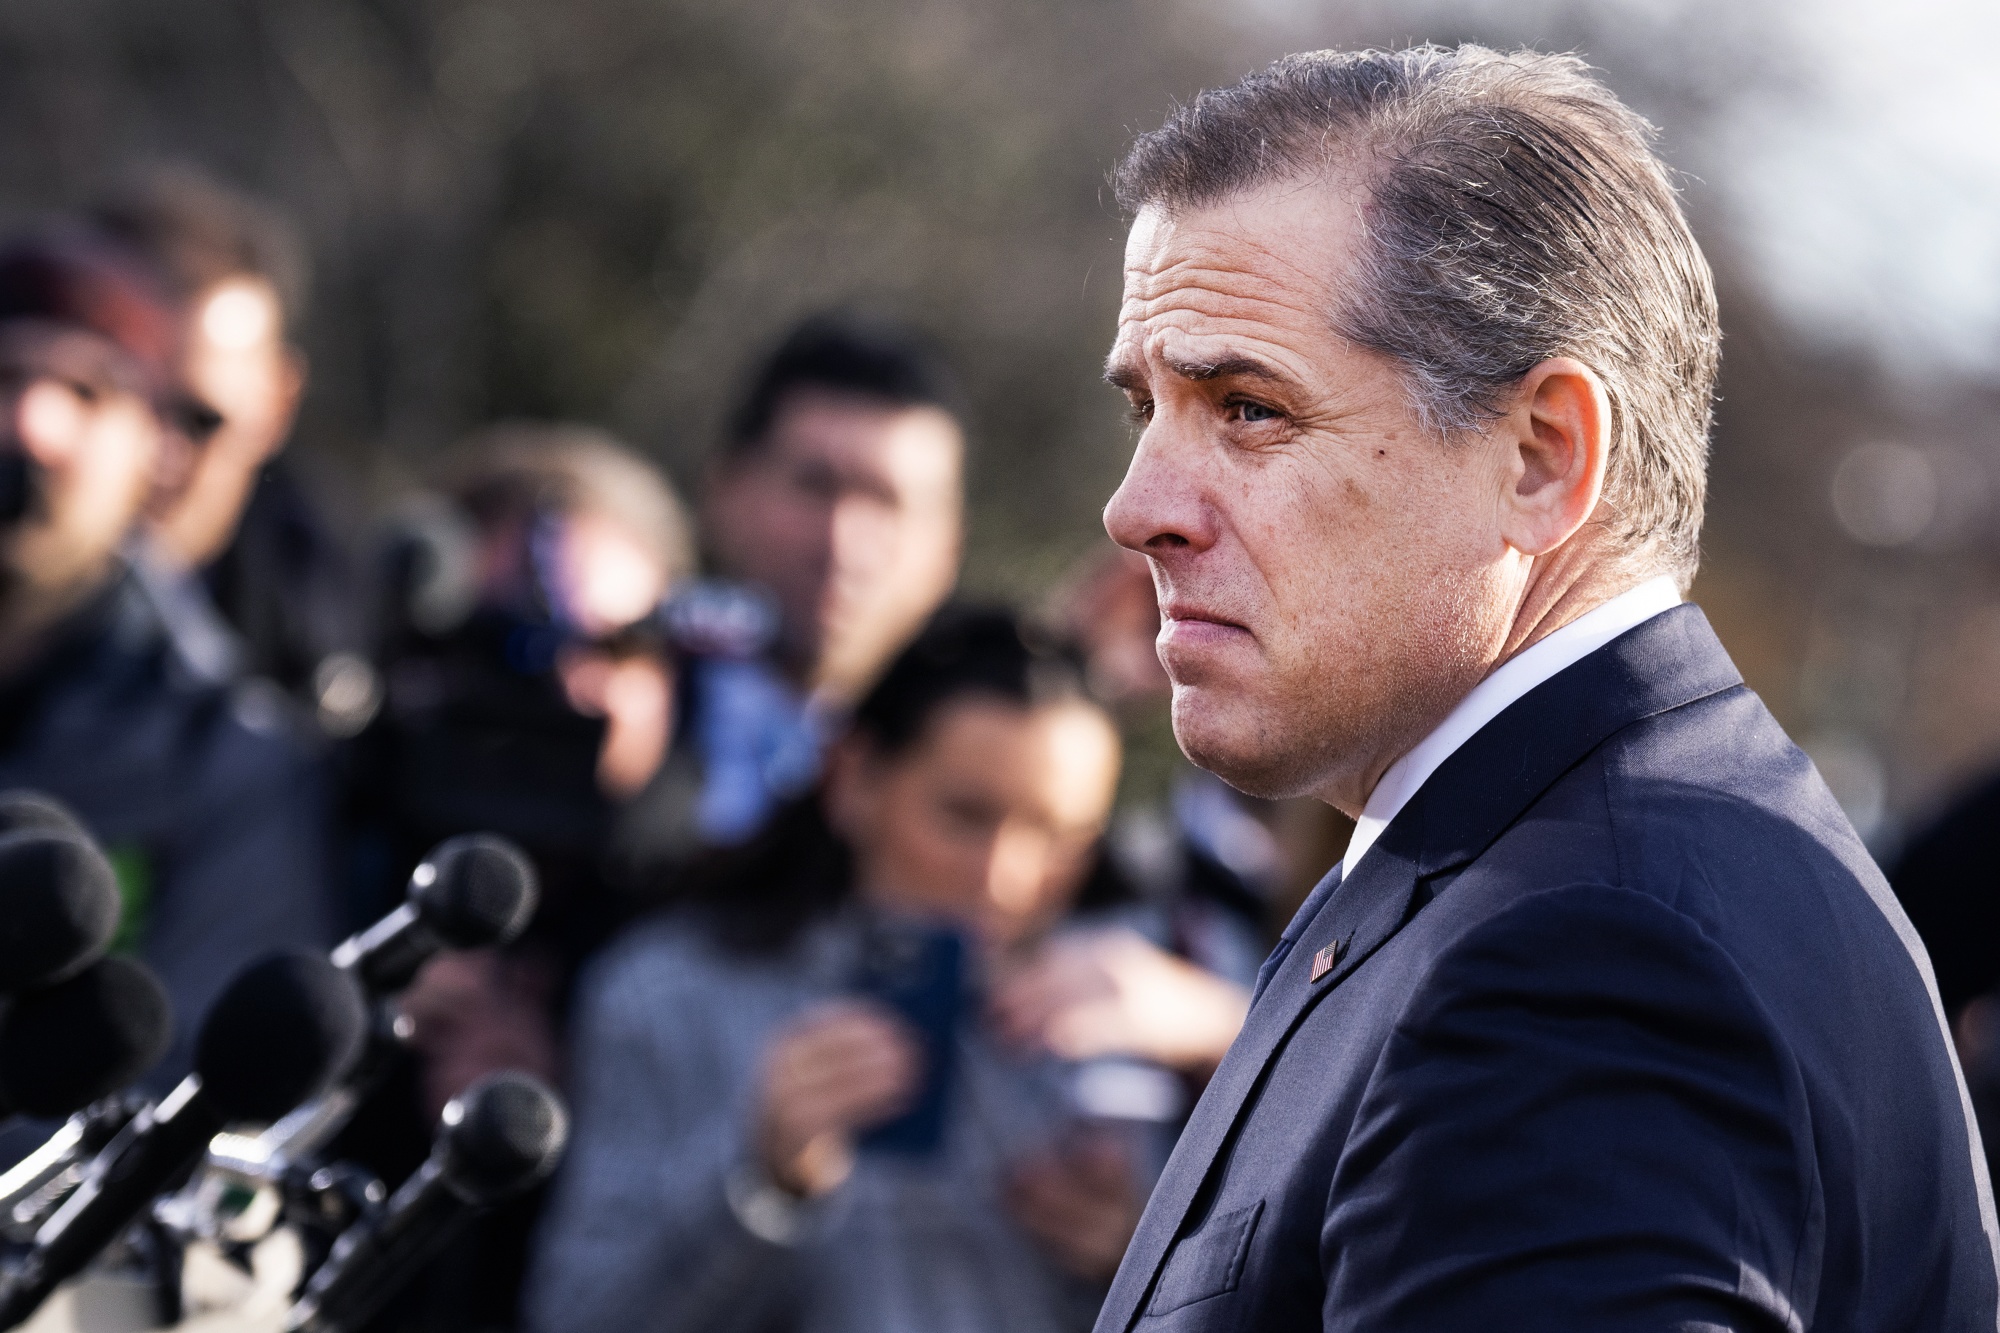 Hunter Biden to Appear in LA Court on Jan 11 Over Tax Charges - Bloomberg